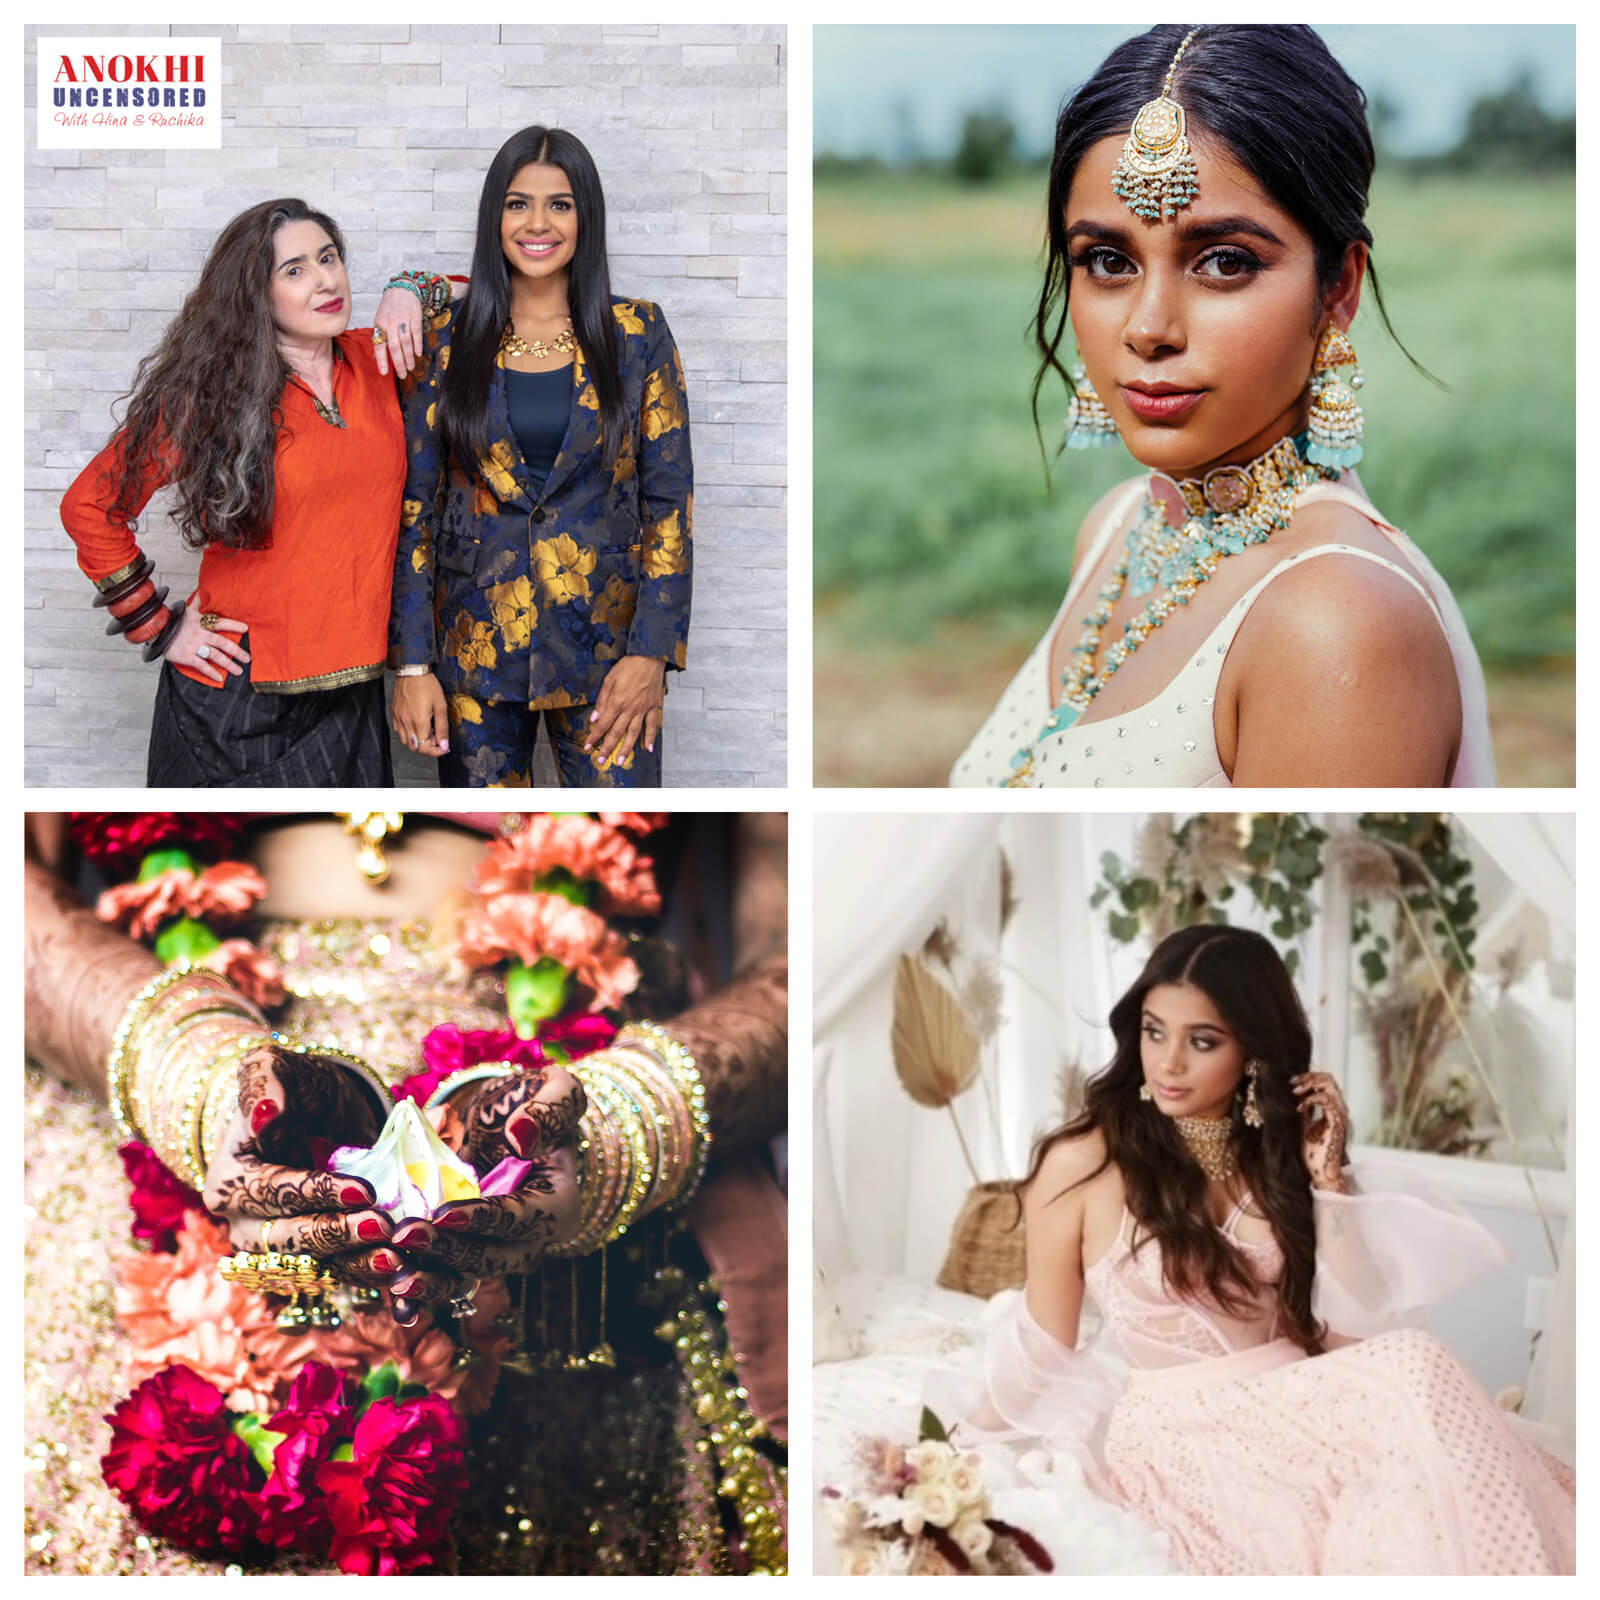 ANOKHI UNCENSORED EPISODE 12: Dear Covid, Has Our Big Fat Indian Wedding Gone Extinct?